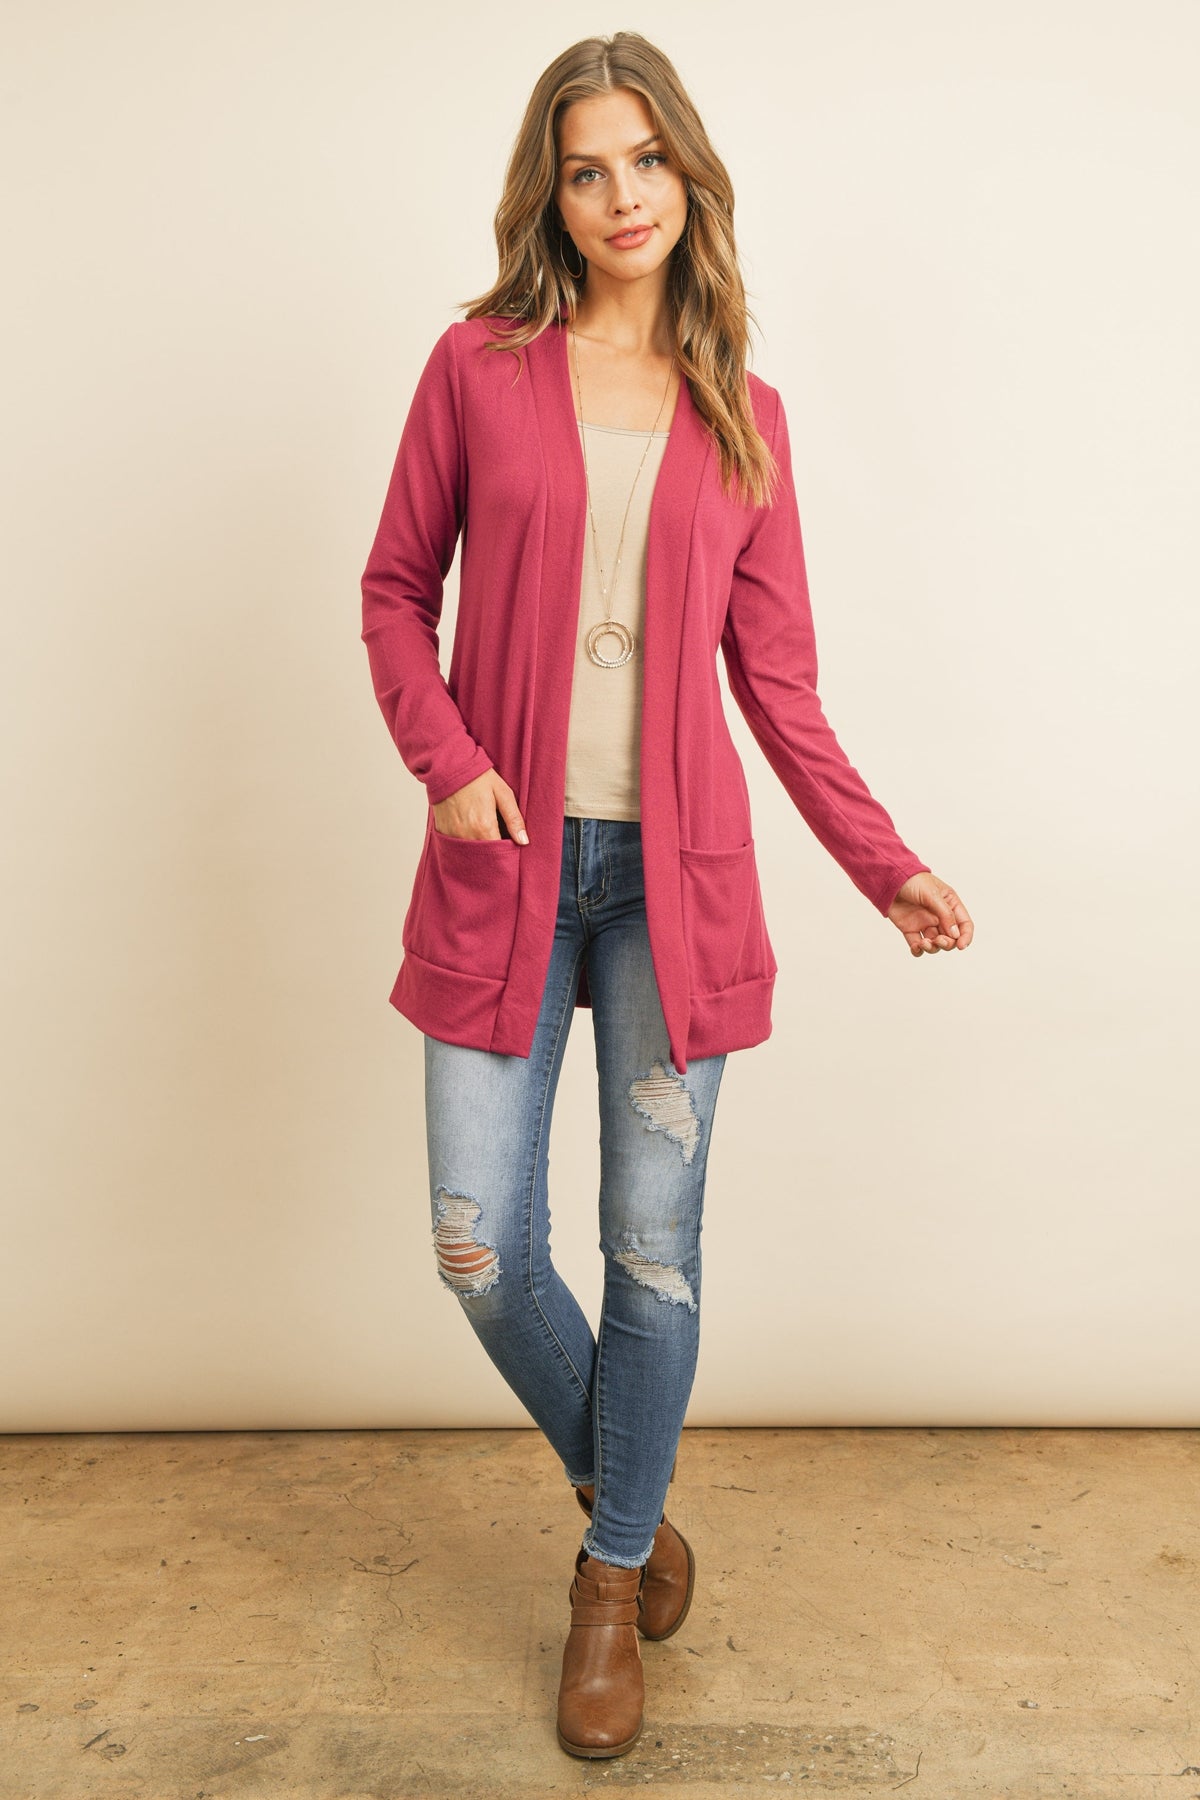 HACCI BRUSHED OPEN FRONT CARDIGAN 1-2-2-2